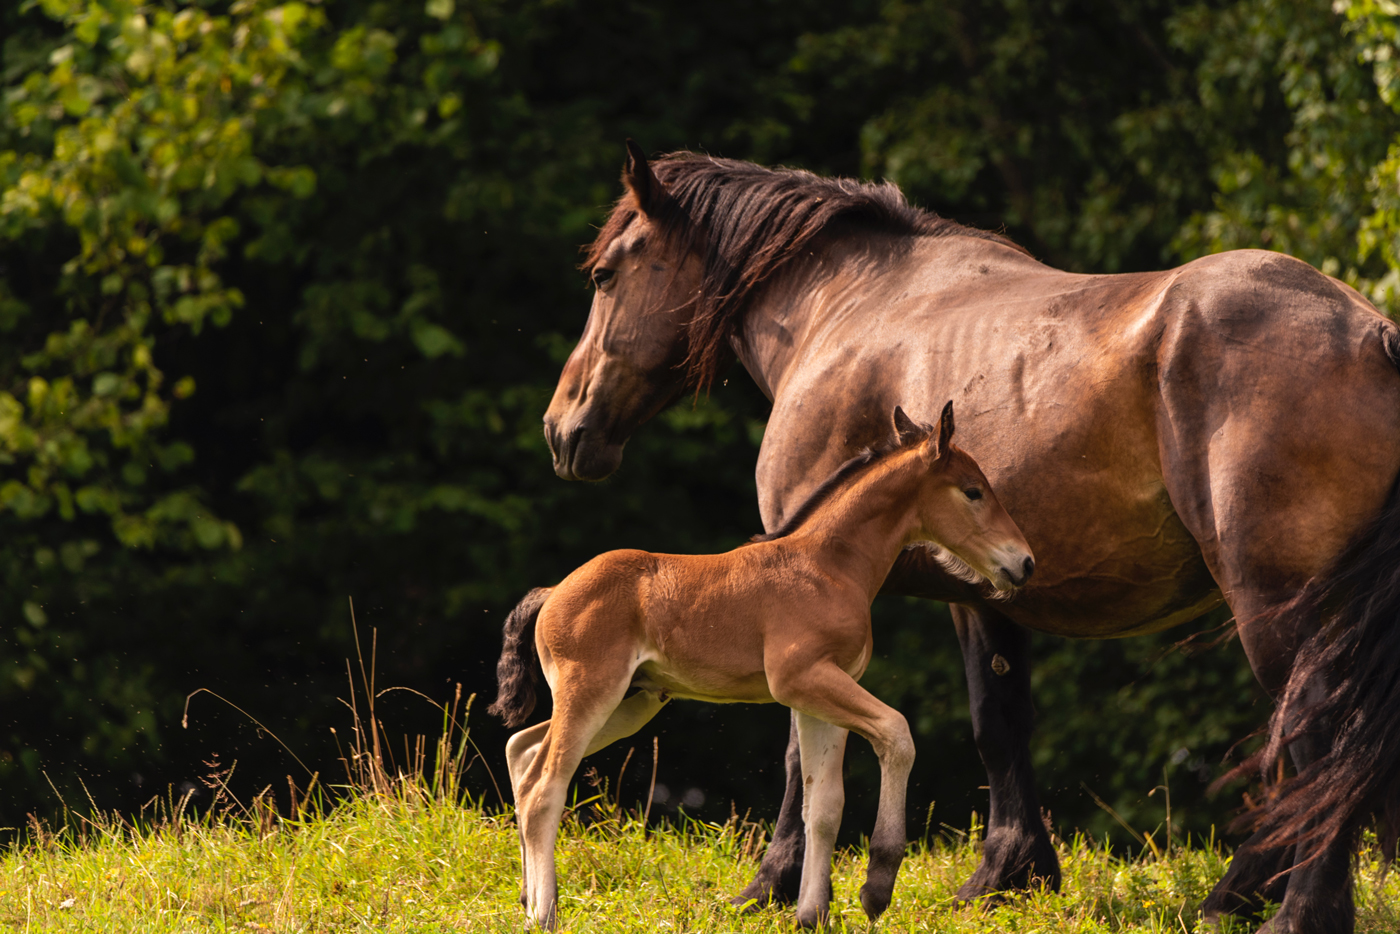 A mare standing next to its foal in a field on a sunny day